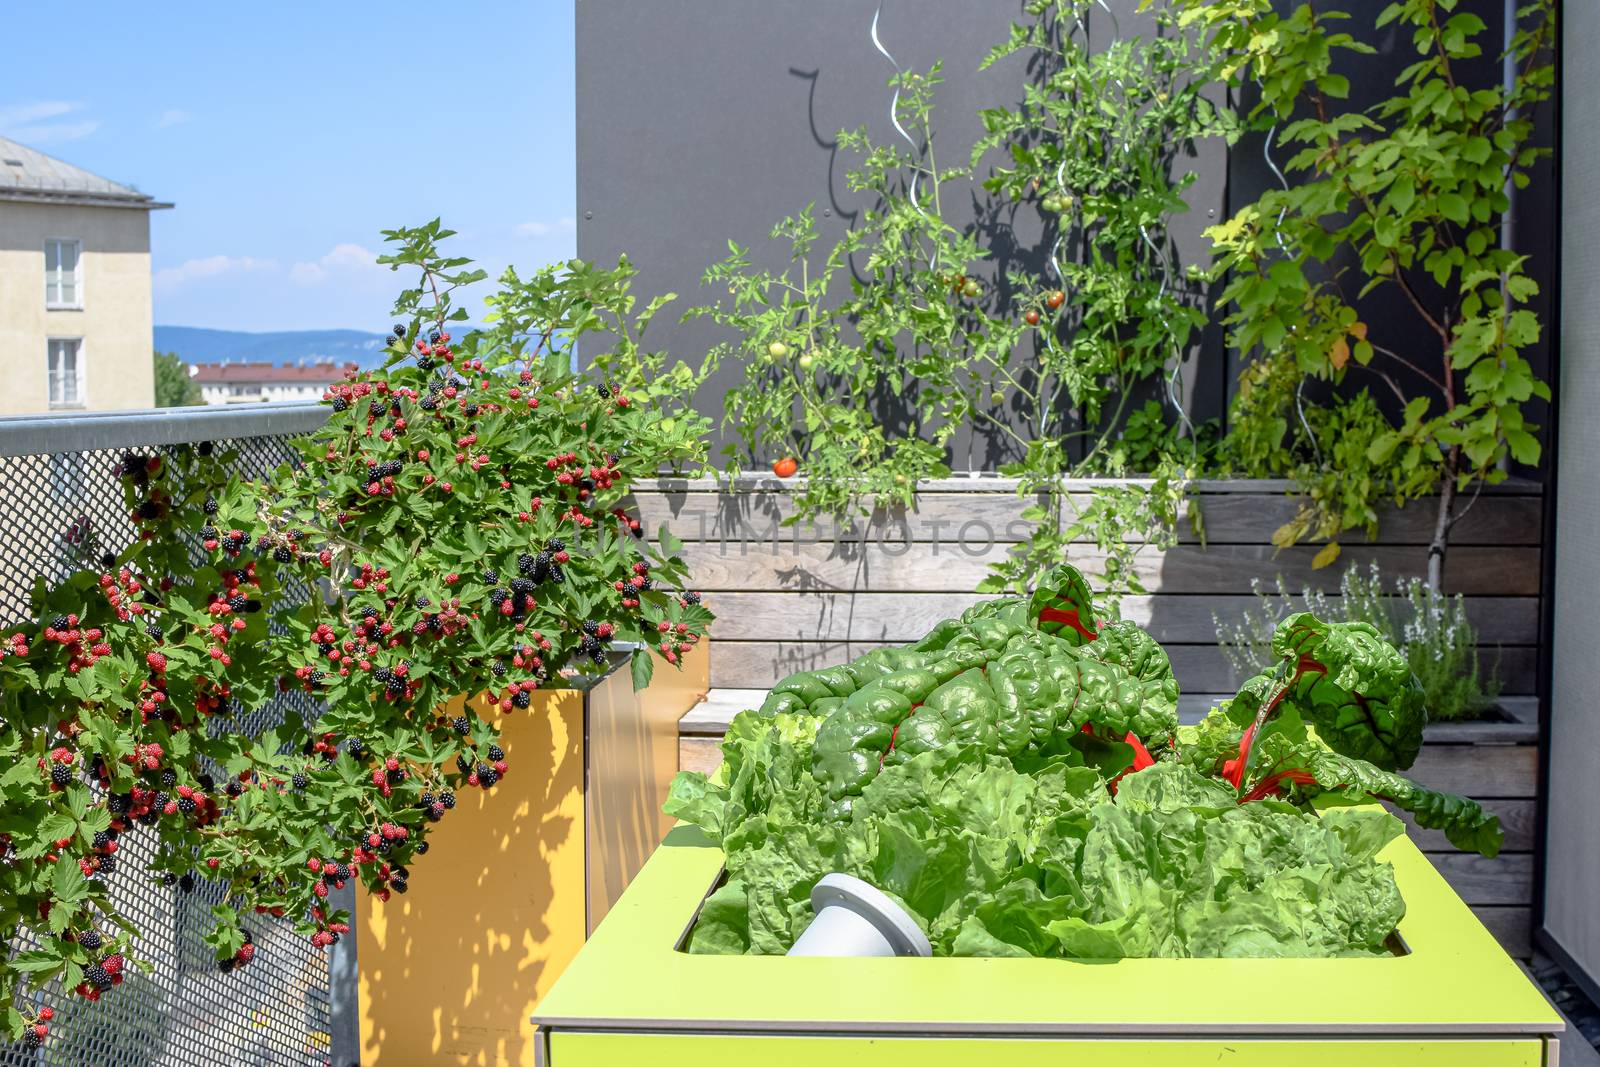 Mangel, tomatoes and blackberries growing on a rooftop garden in Vienna by Umtsga